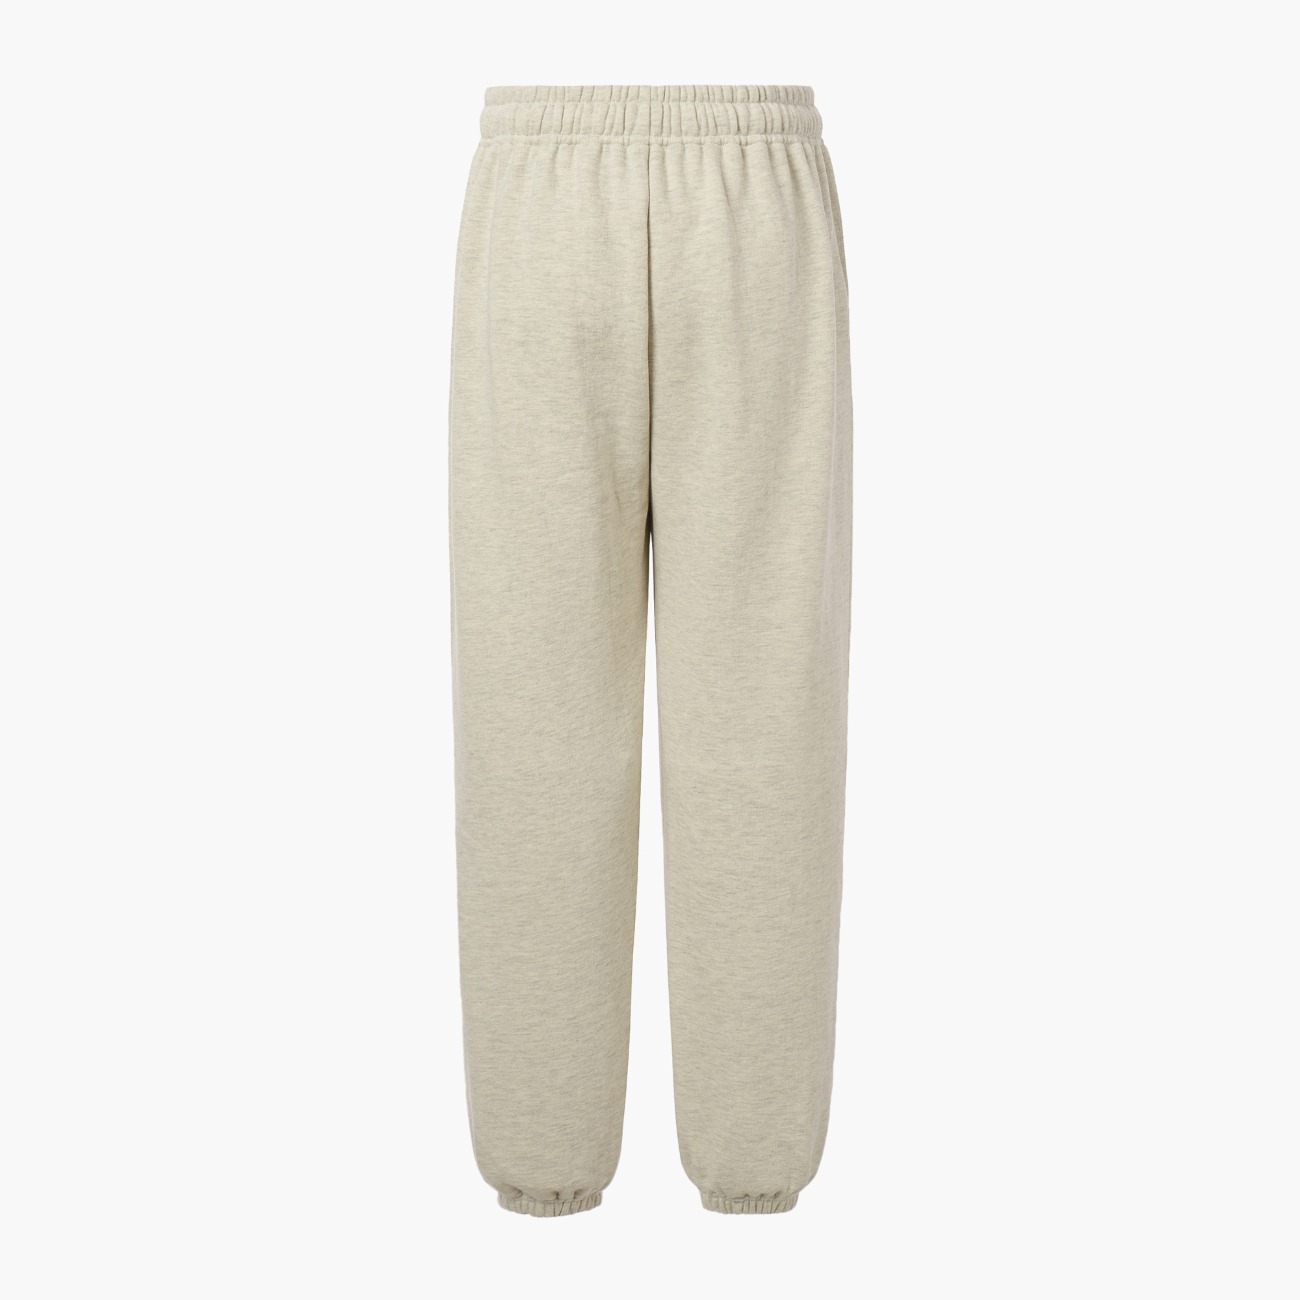 WOMENS RELAXED FIT JOGGERS, OATMEAL